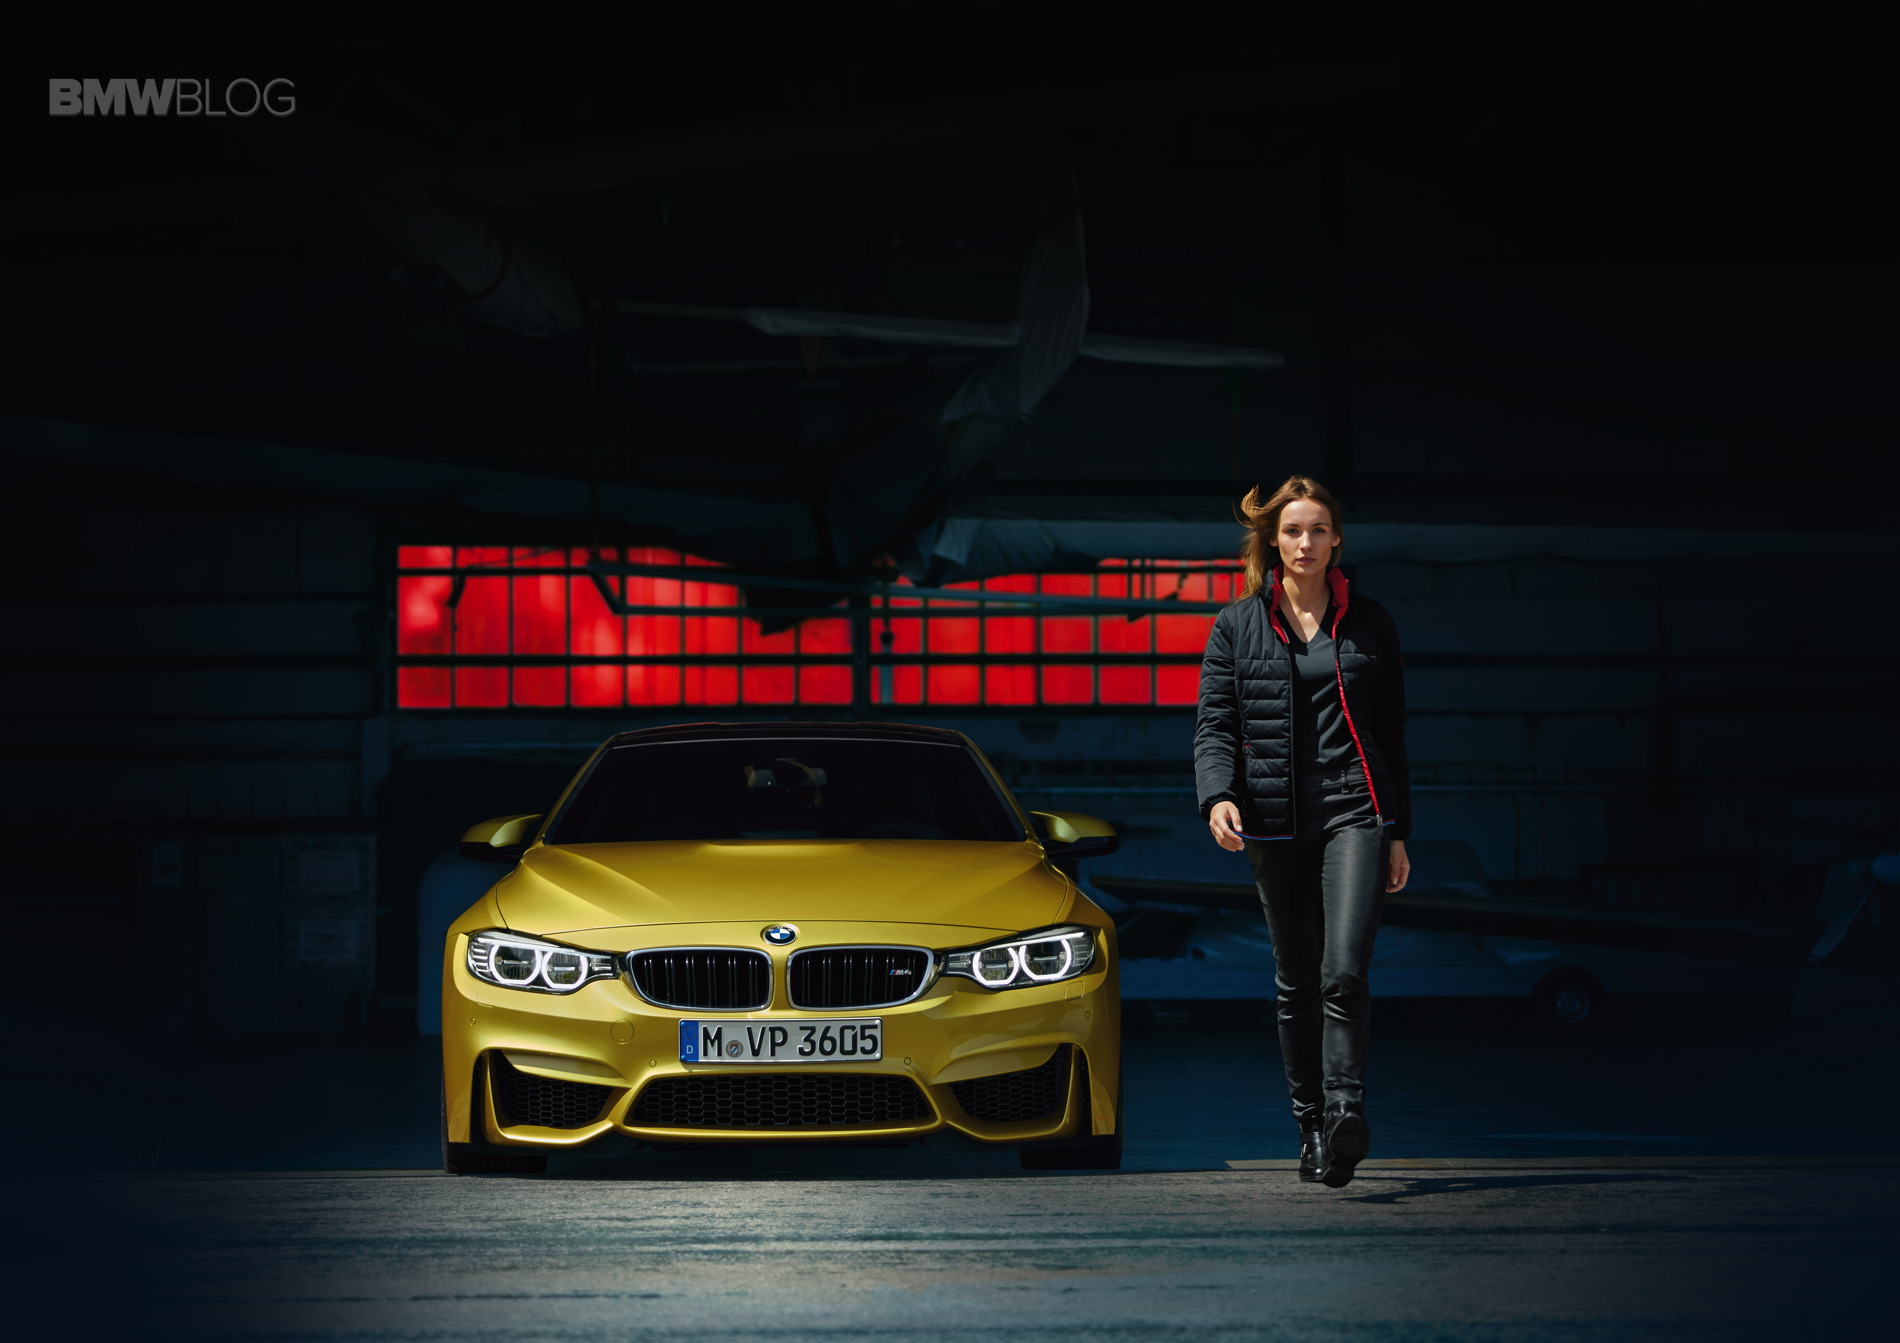 Bmw lifestyles collection #6